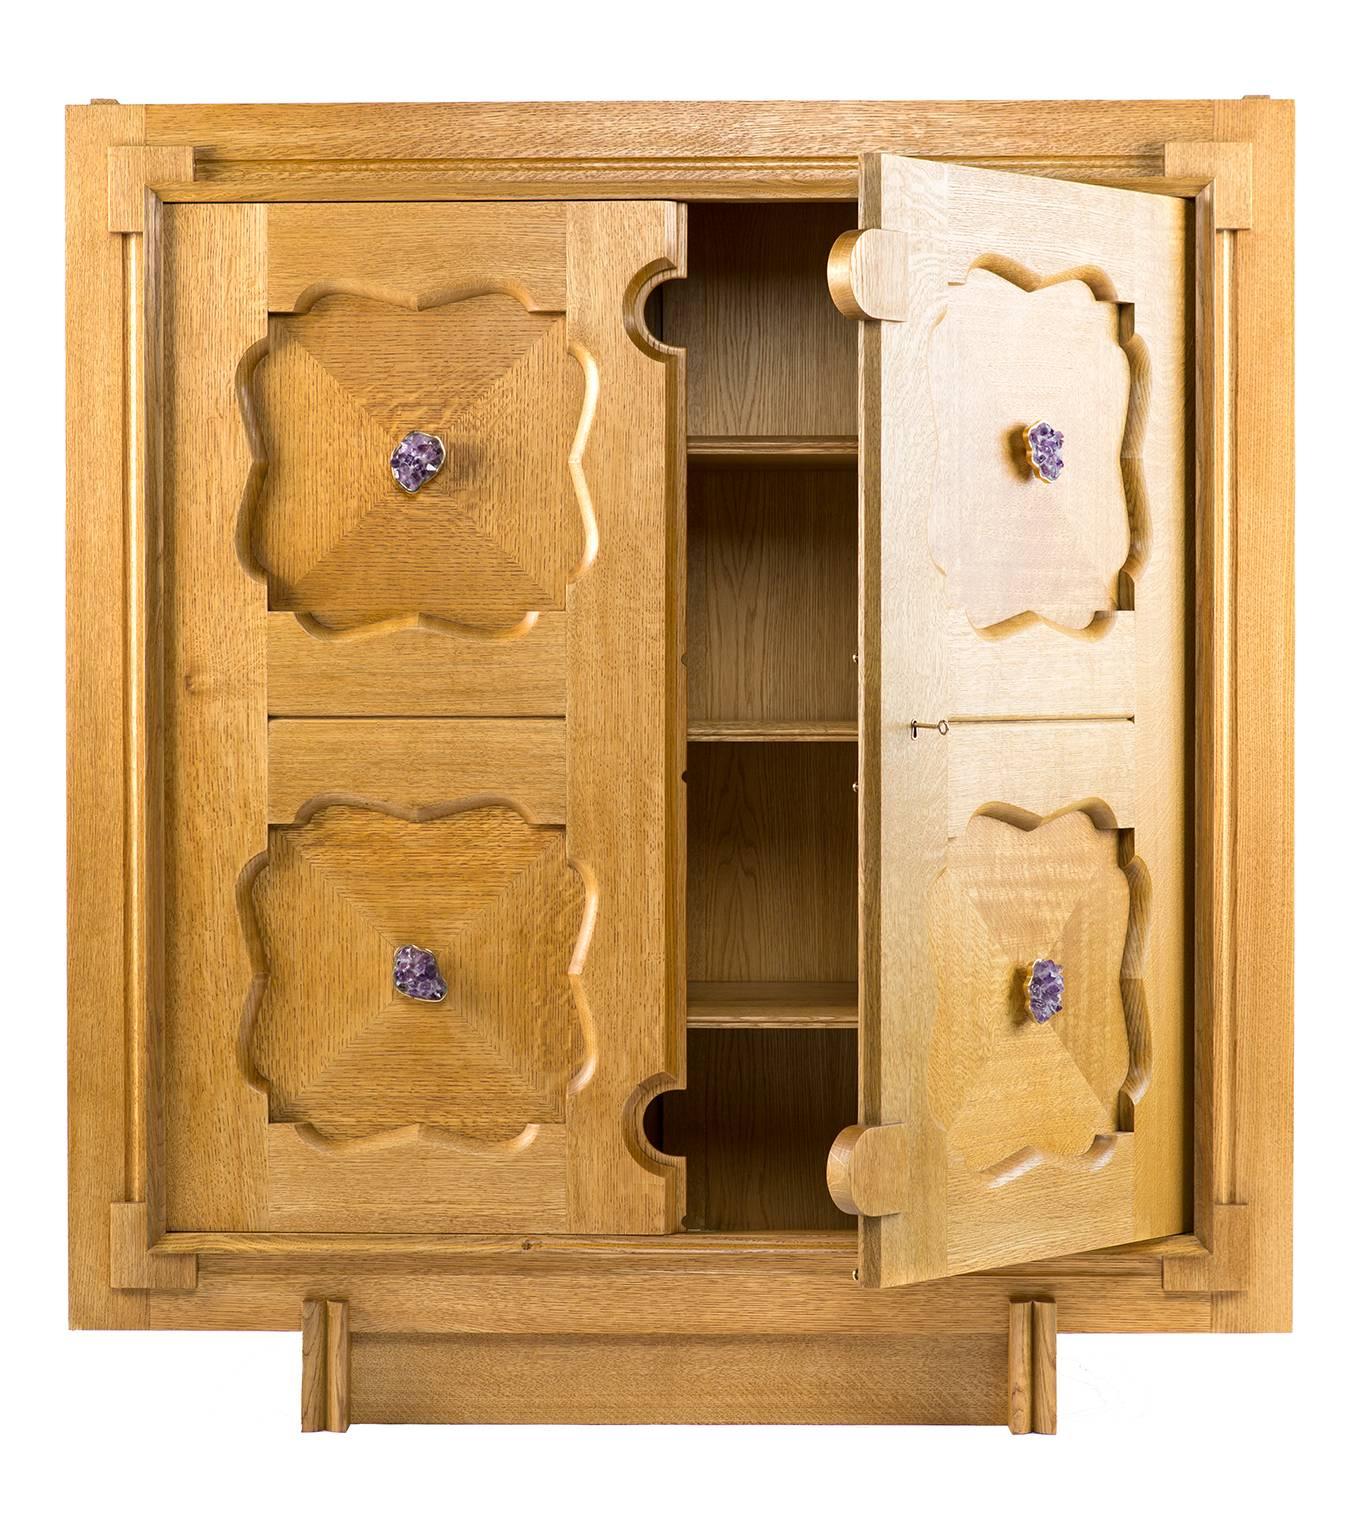 The Parterre cabinet in white oak with natural finish, amethyst clusters, and unlacquered brass hardware. The main body of the cabinet rests on a removable oak stand. Paneled doors secure with a custom brass and steel cremone bolt. 

The paneled